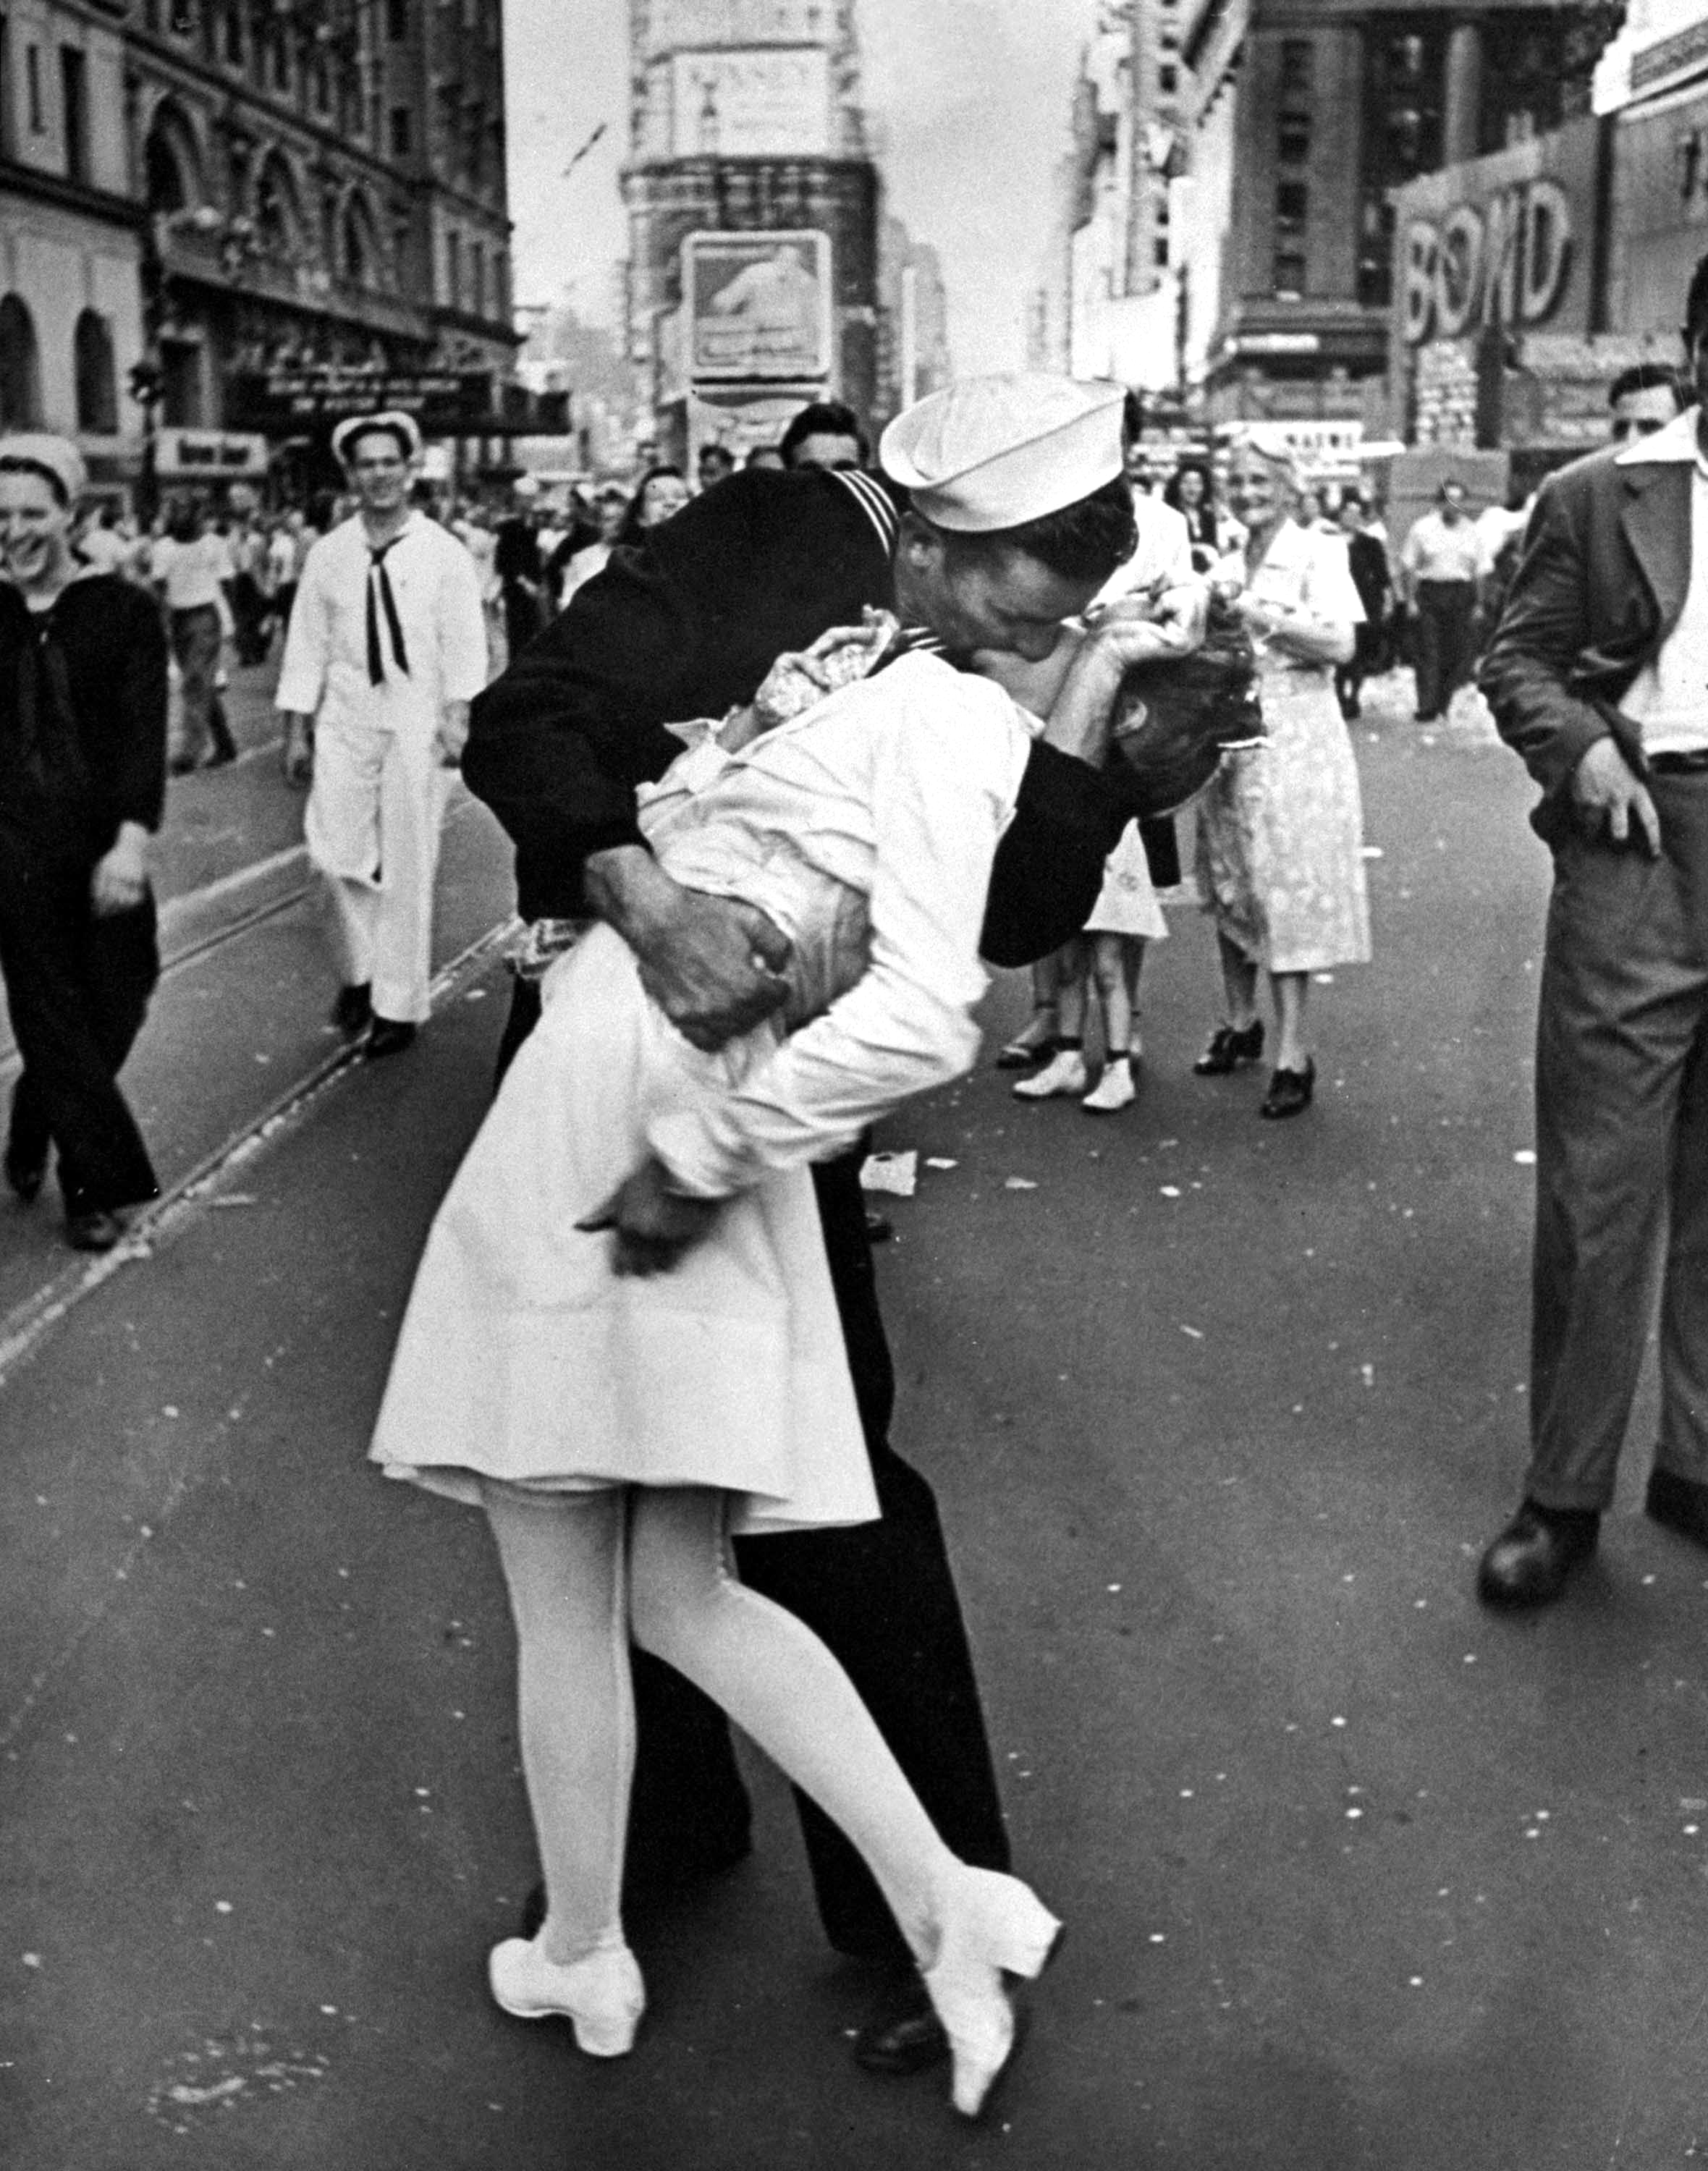 V-J Day, Aug. 14, 1945. Caption from the Aug. 27, 1945, issue of LIFE magazine:  In the middle of New York's Times Square a white-clad girl clutches her purse and skirt as an uninhibited sailor plants his lips squarely on hers.